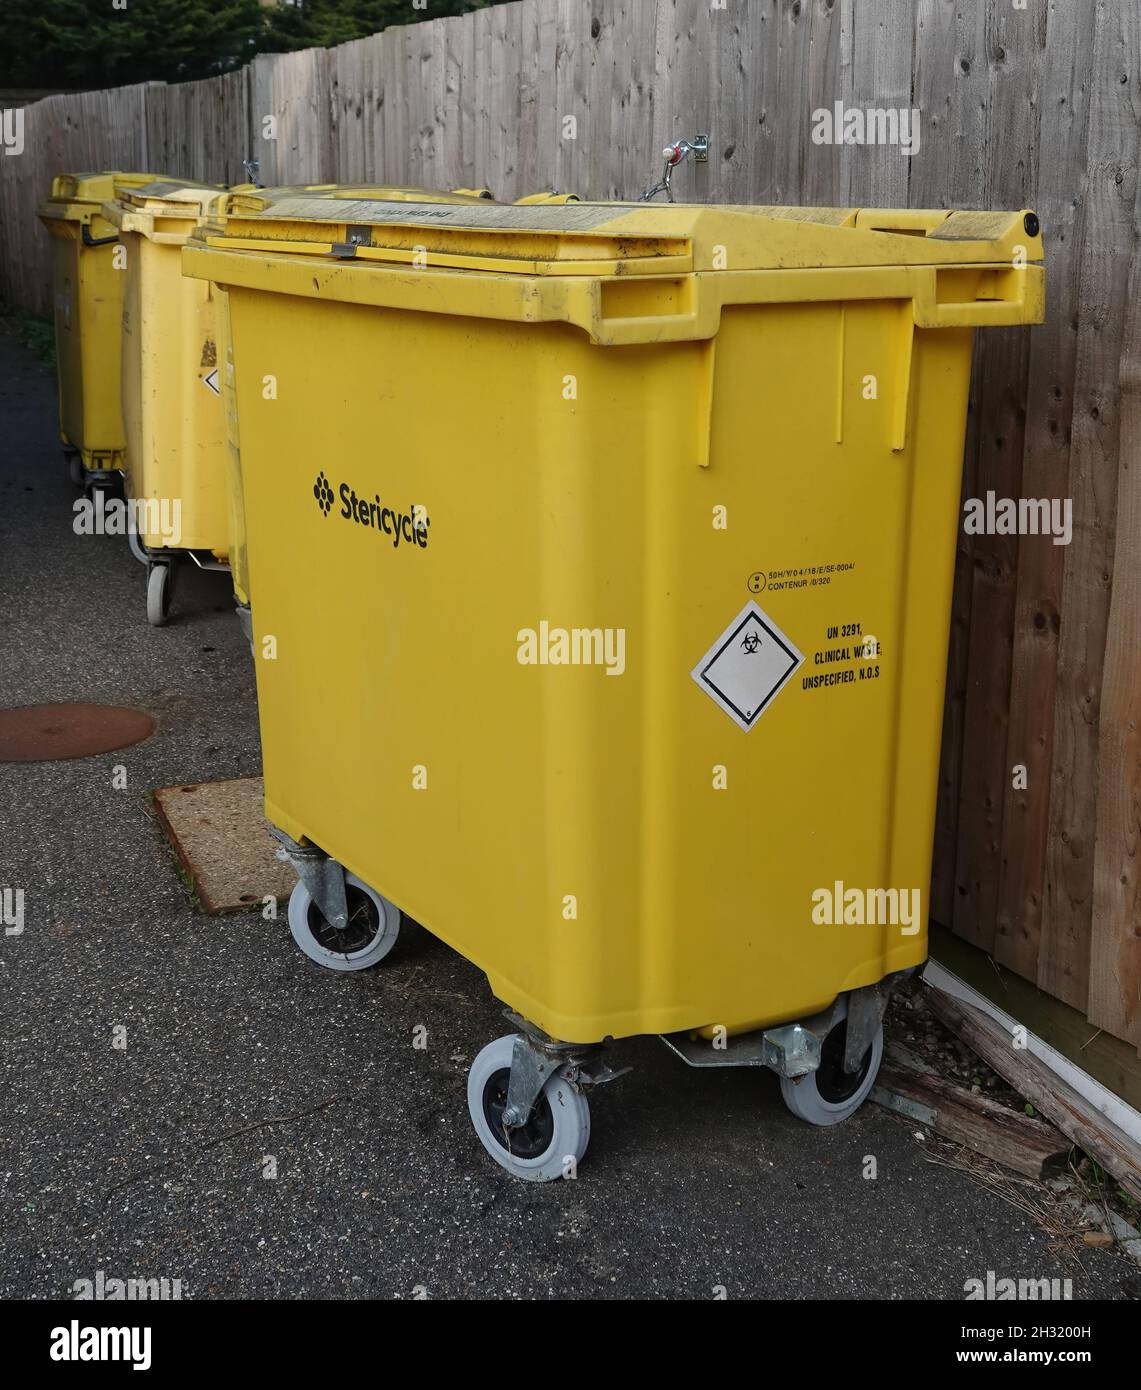 BILLERICAY, UNITED KINGDOM - Sep 29, 2021: A row of yellow medical waste disposal bins with Stericycle text outside St. Andrews Centre Stock Photo